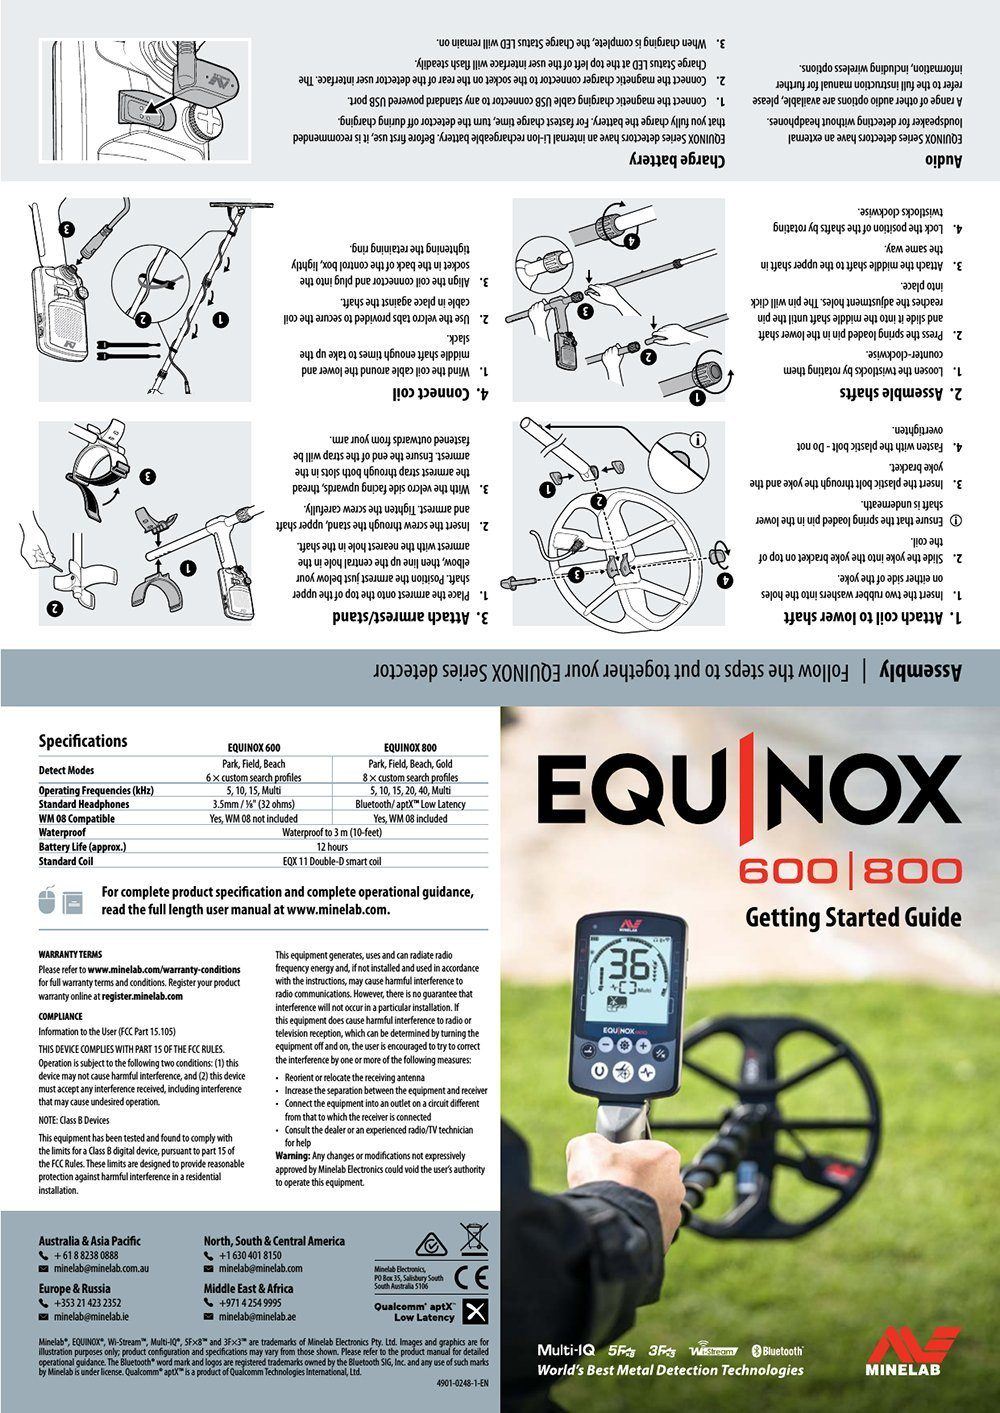 Minelab Equinox 600 & 800 getting started guide